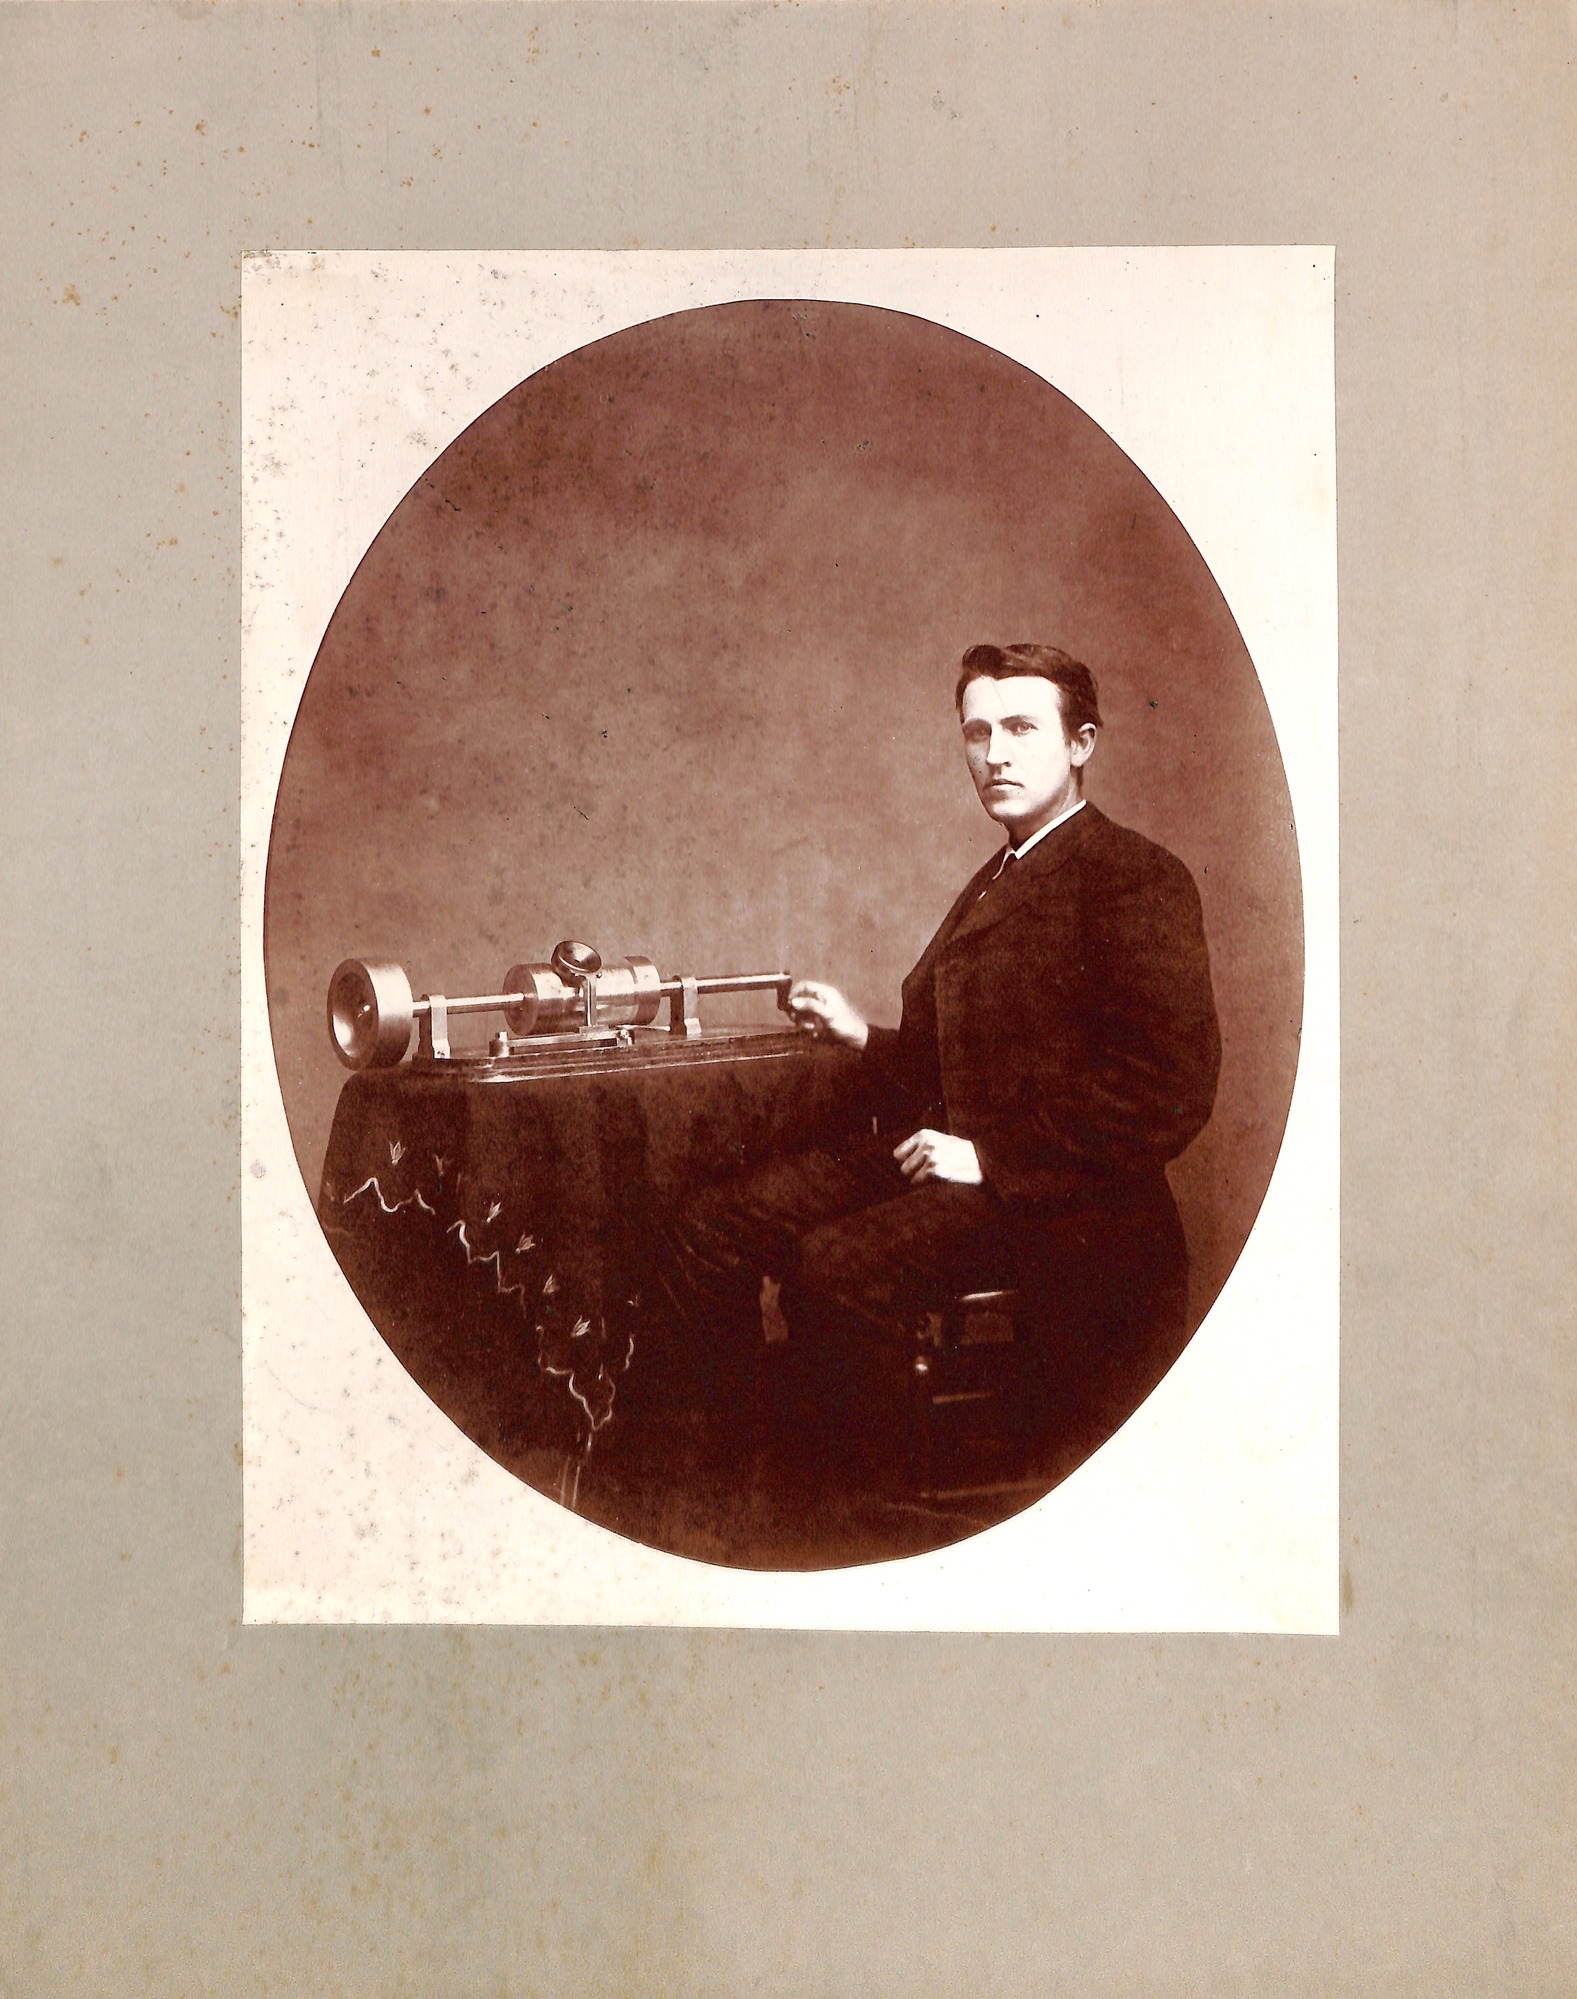 Thomas Edison with Tin-Foil Phonograph at the studio of Mathew Brady. In Washington DC Edison demonstrated his Tin-Foil Phonograph to the National Academy of Science meeting and to President Rutherford B. Hayes.